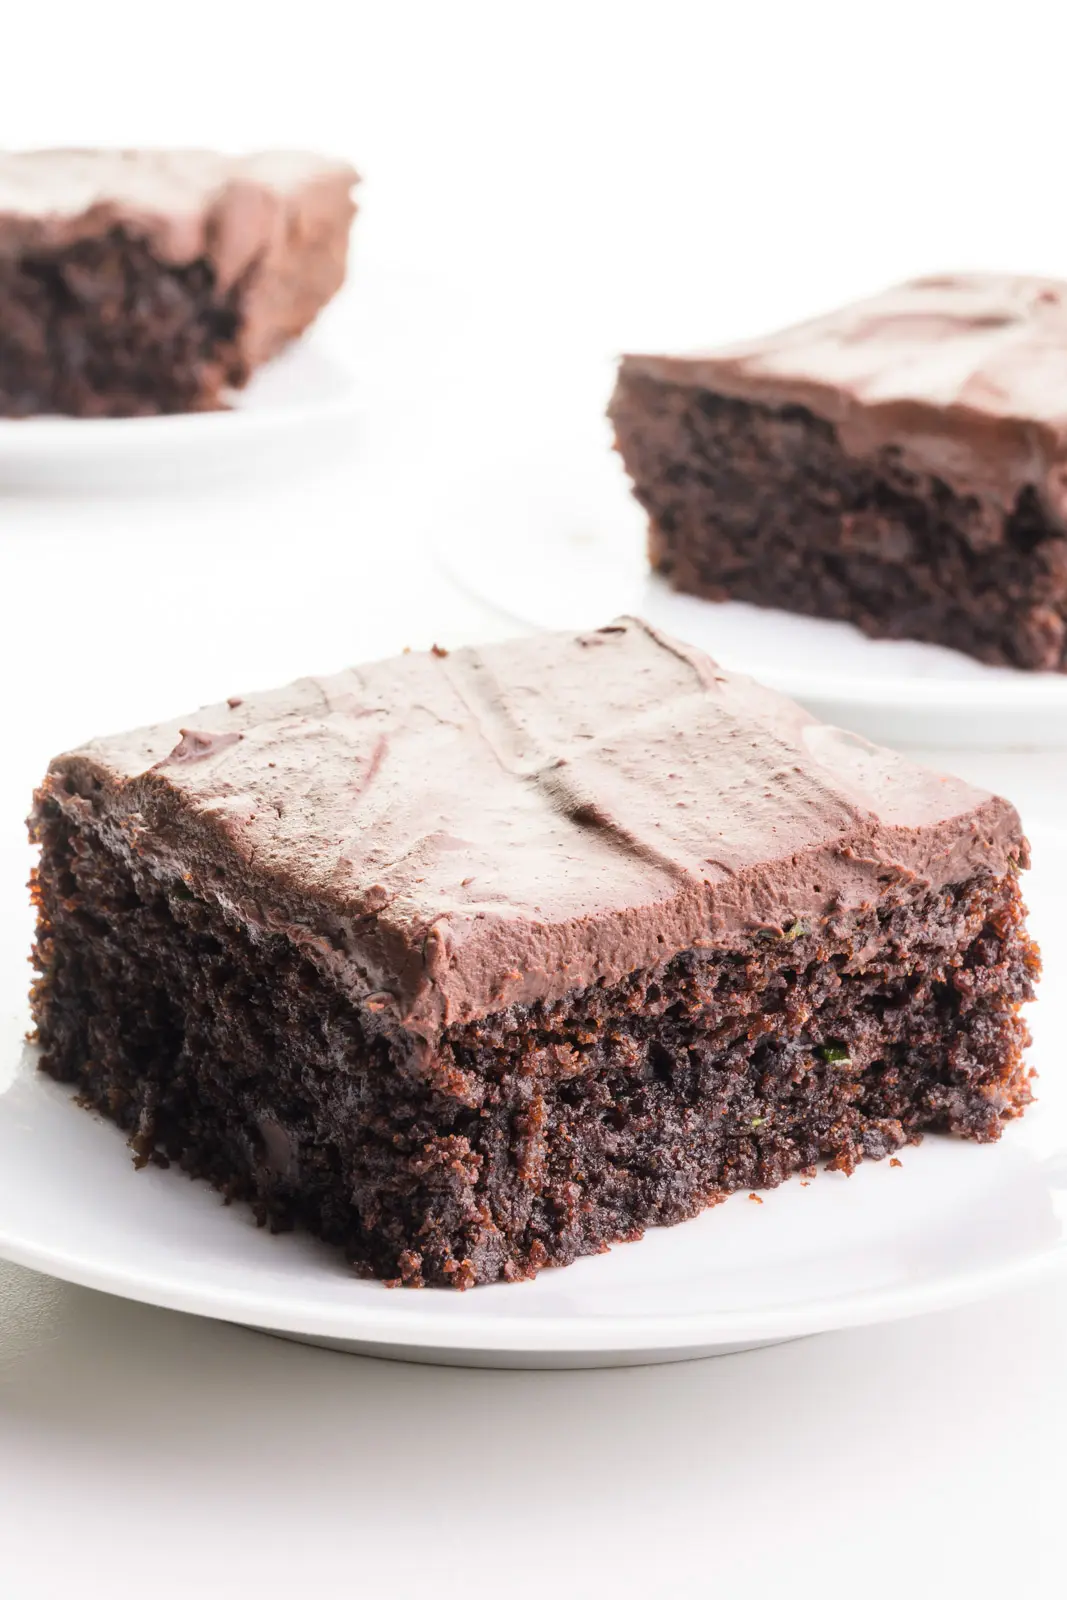 Three slices of vegan chocolate zucchini cake are on plates. They all are topped with chocolate frosting.